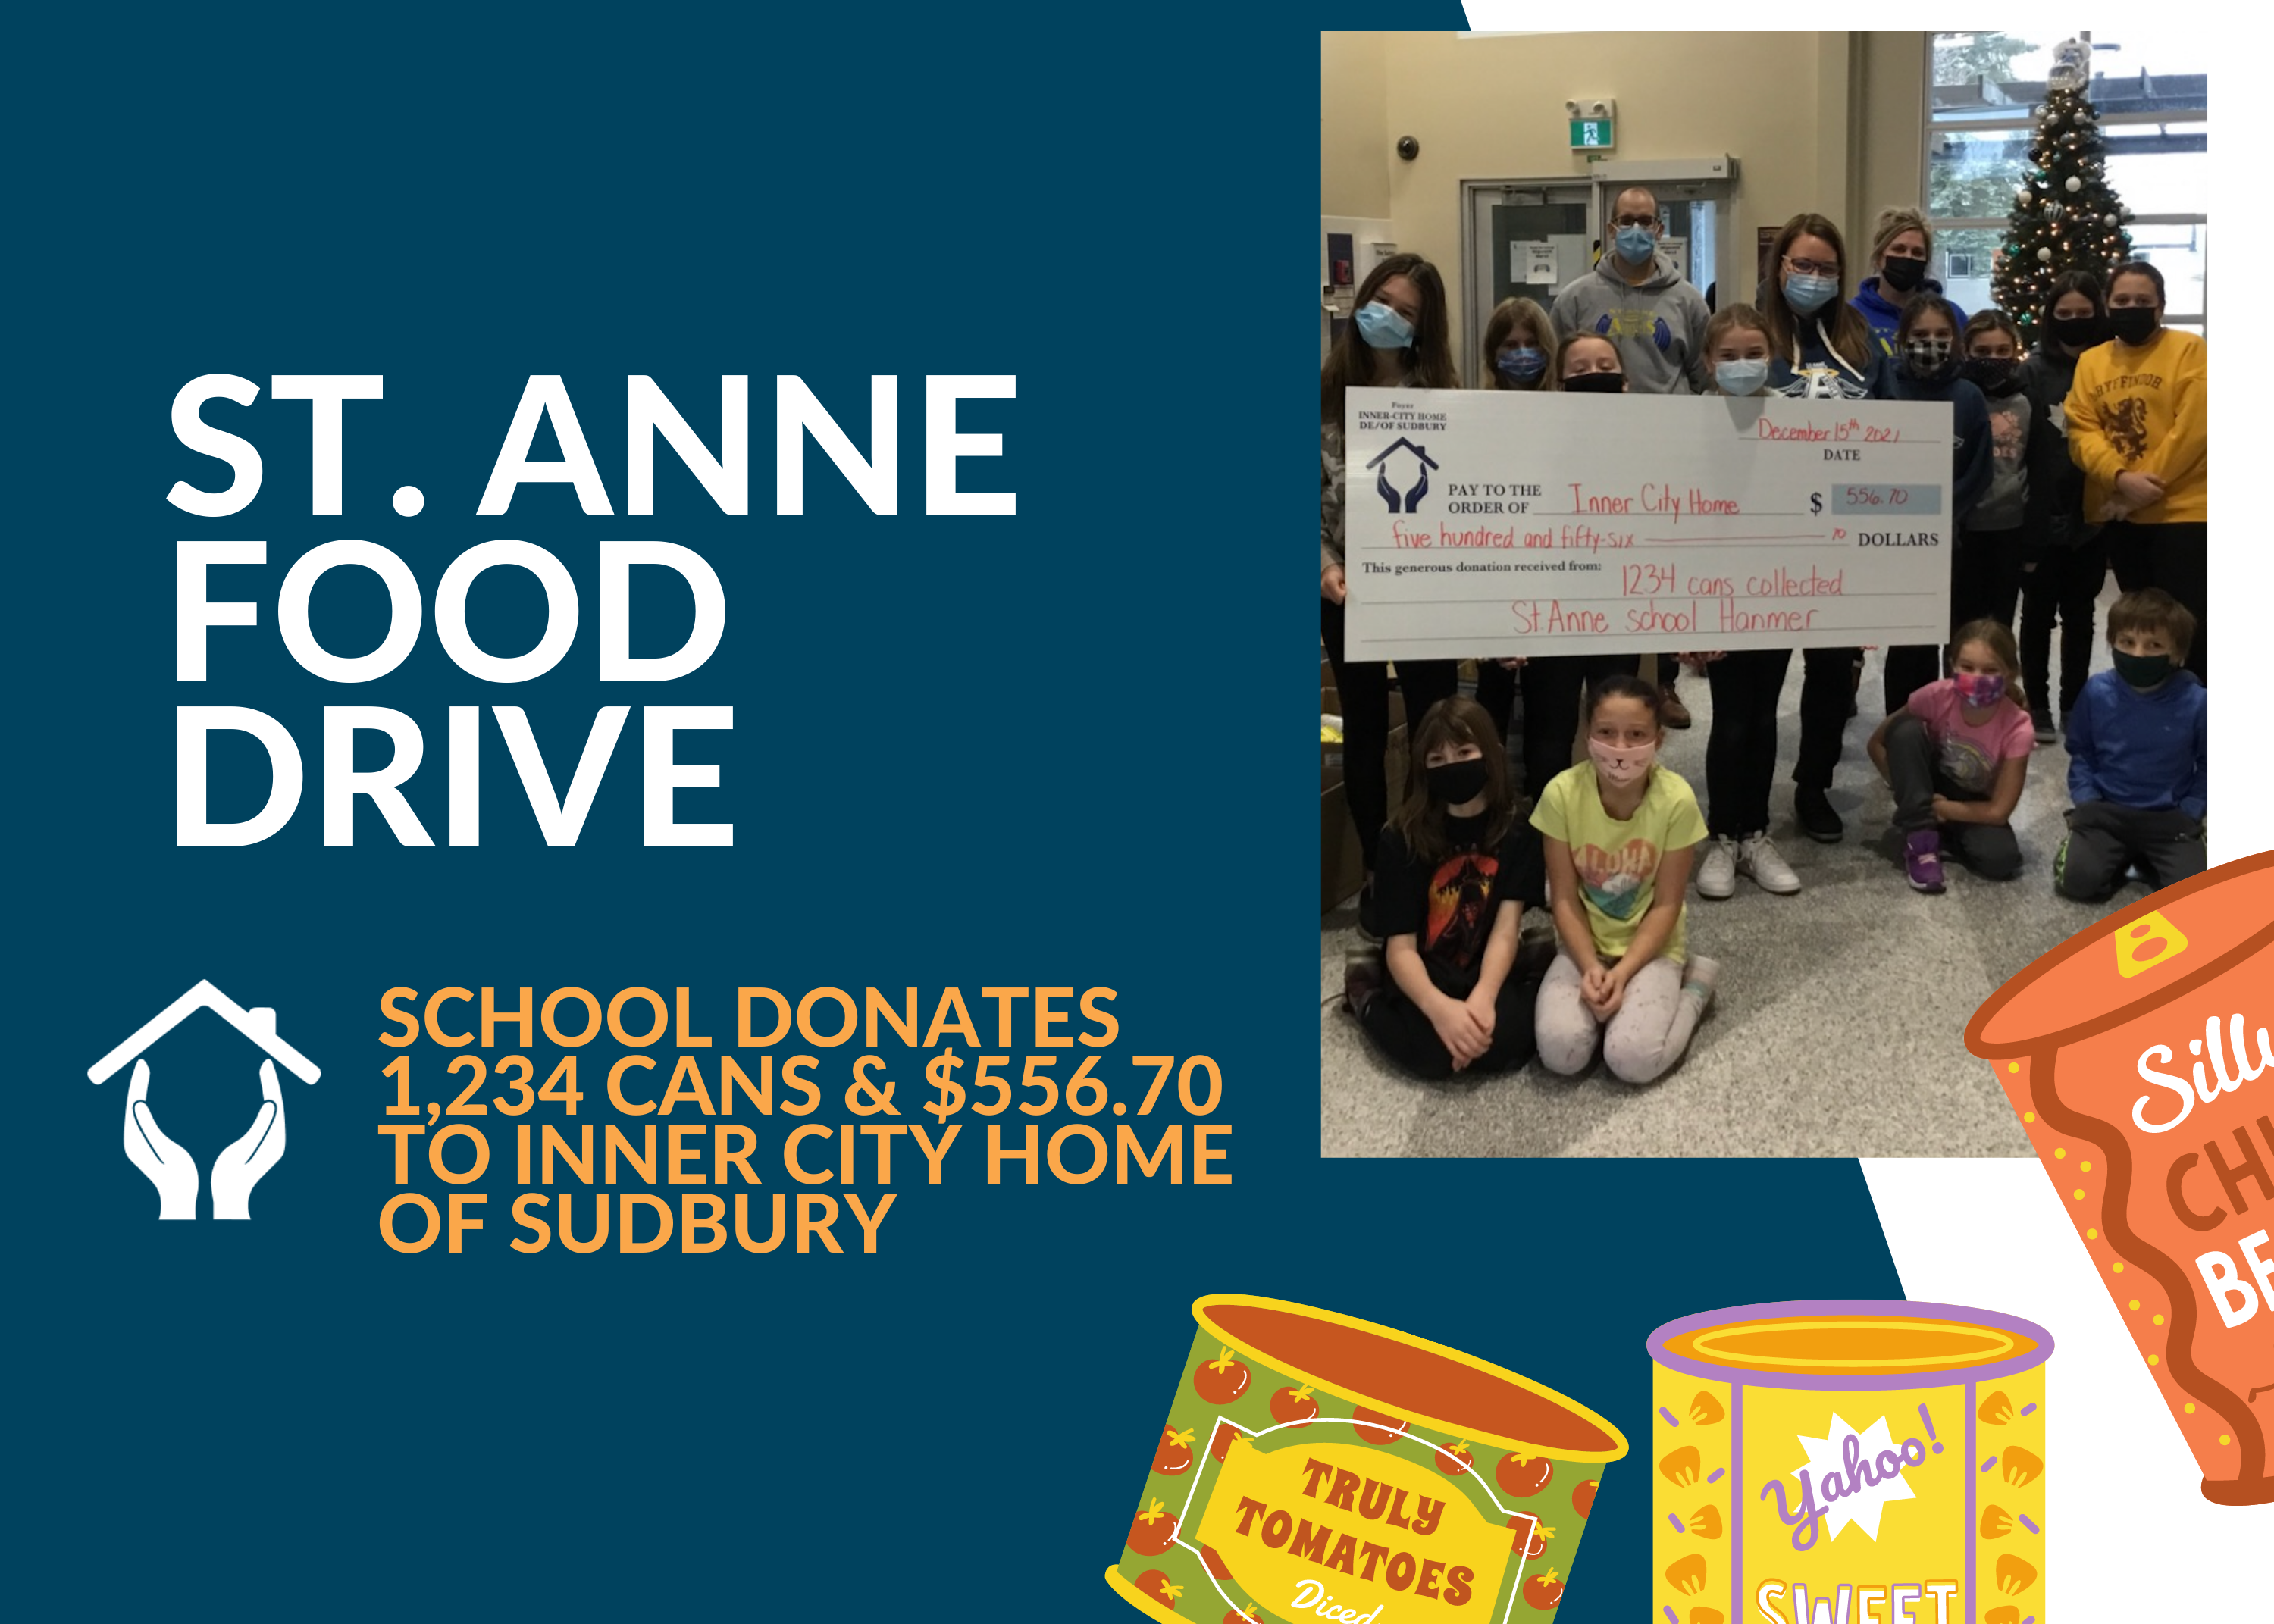 St. Anne School Donates 1,234 Cans & $556.70 to Inner City Home Of Sudbury